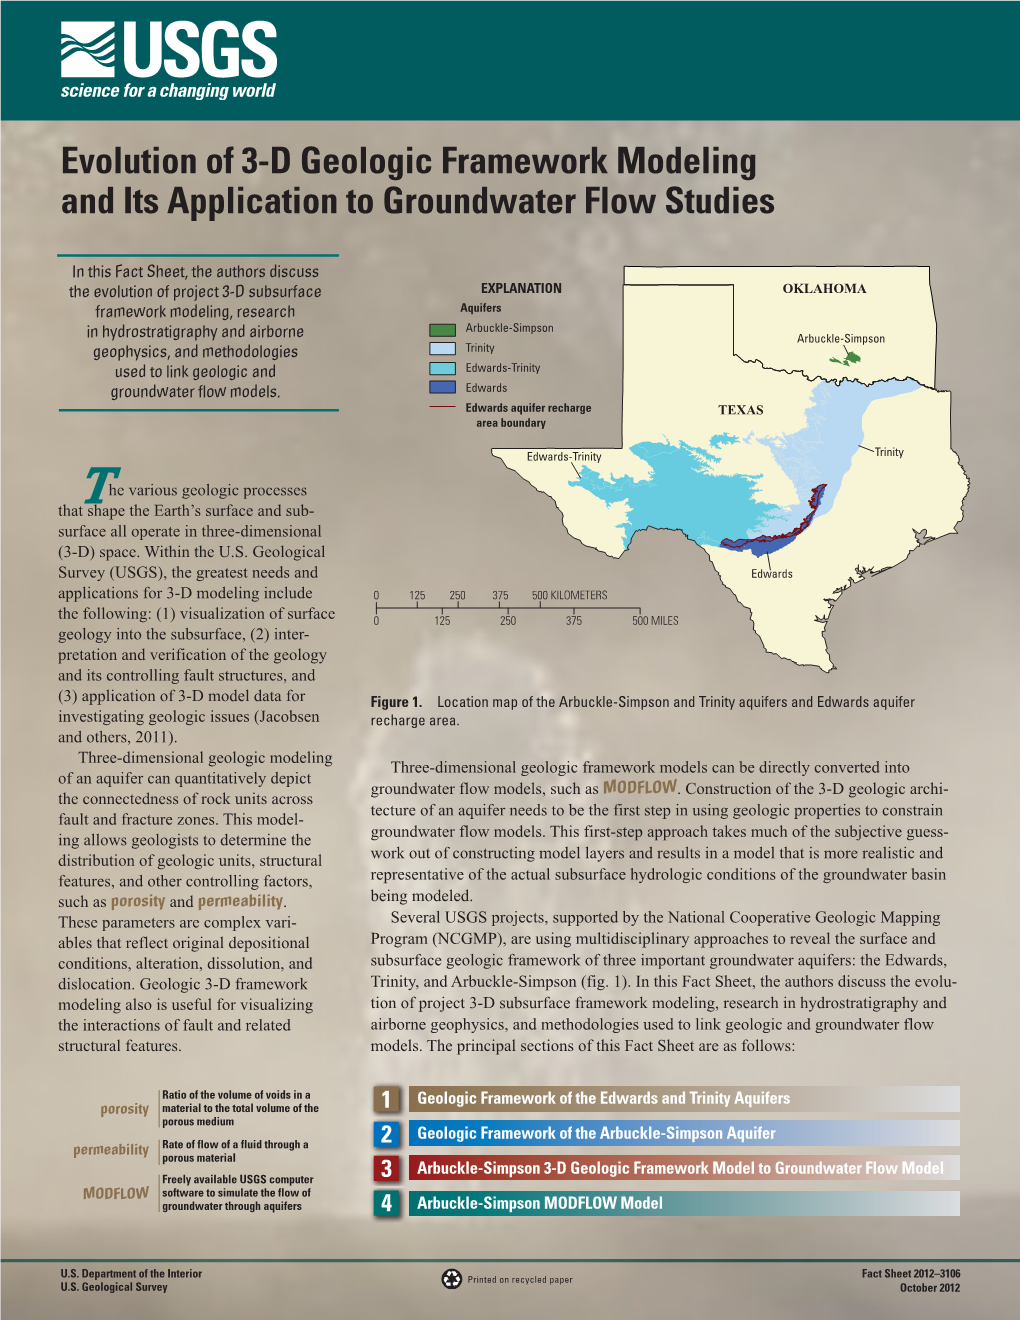 Evolution of 3-D Geologic Framework Modeling and Its Application to Groundwater Flow Studies